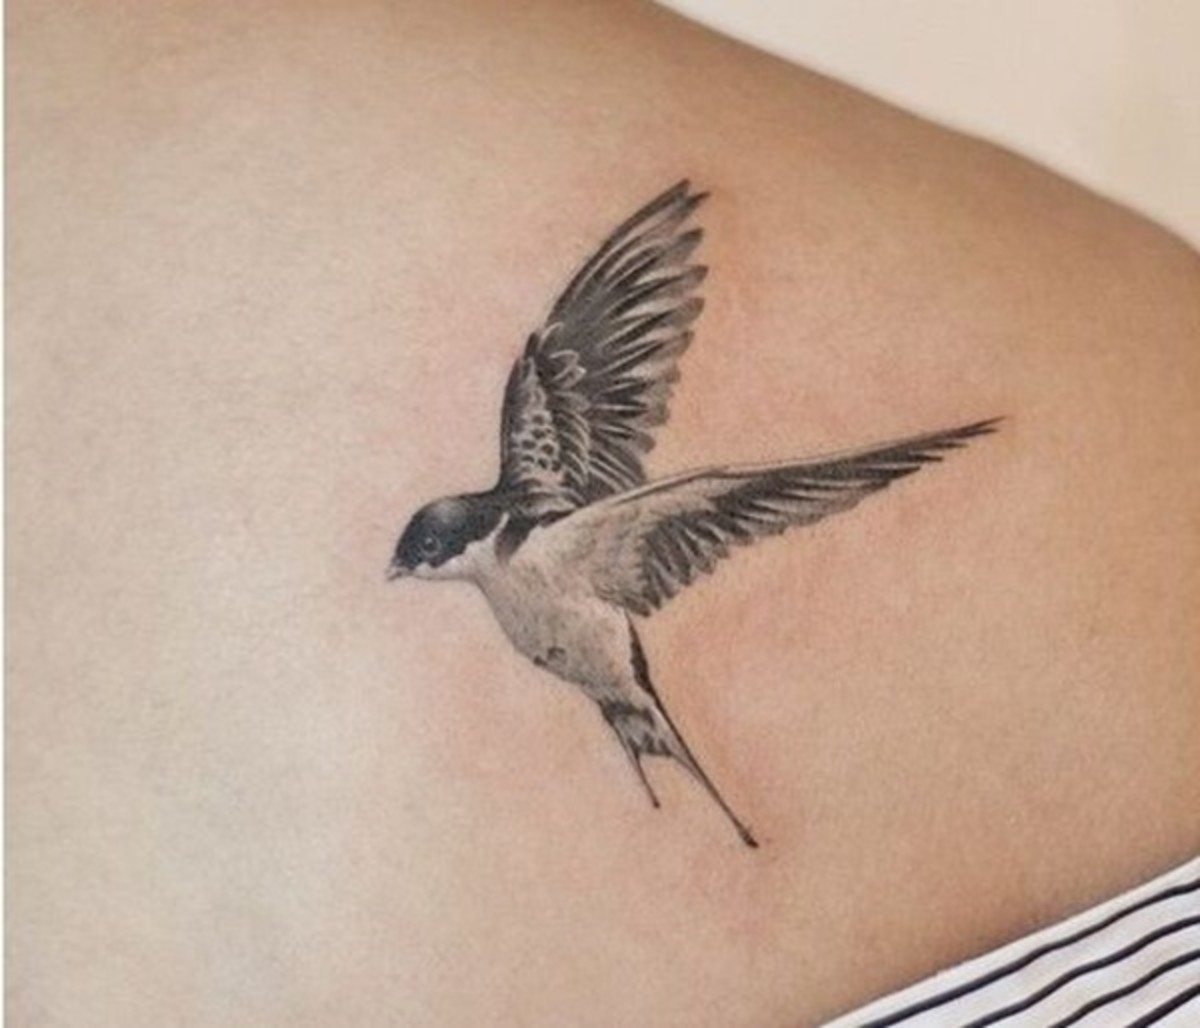 A delicate swallow tattoo.